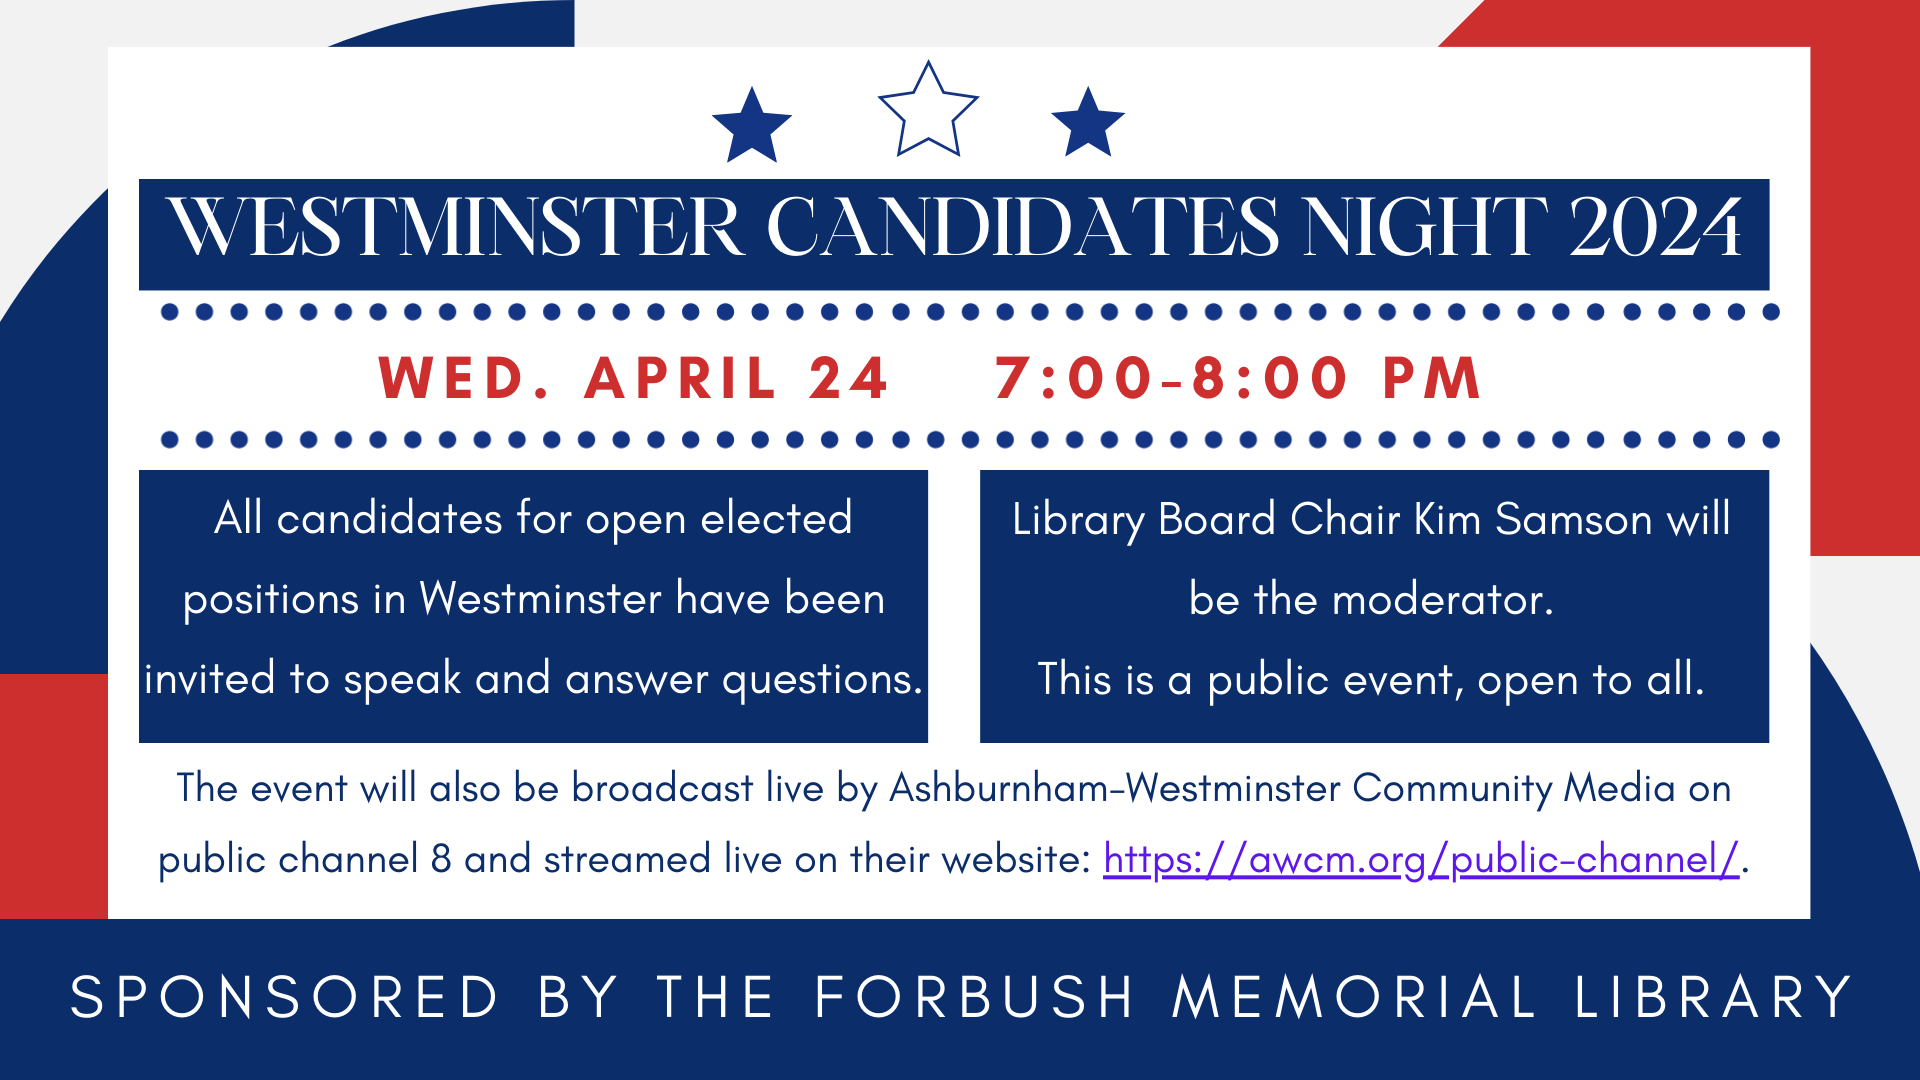 2024 Candidates Night. Wednesday April 24 at 7 PM. This is a public event, open to all, no registration is required. All candidates for open elected positions in Westminster have been invited to come and speak and answer questions. Library Board Chair Kim Samson will be the moderator.  The event will also be broadcast live by Ashburnham-Westminster Community Media on public channel 8 and streamed live on their website: https://awcm.org/public-channel/.